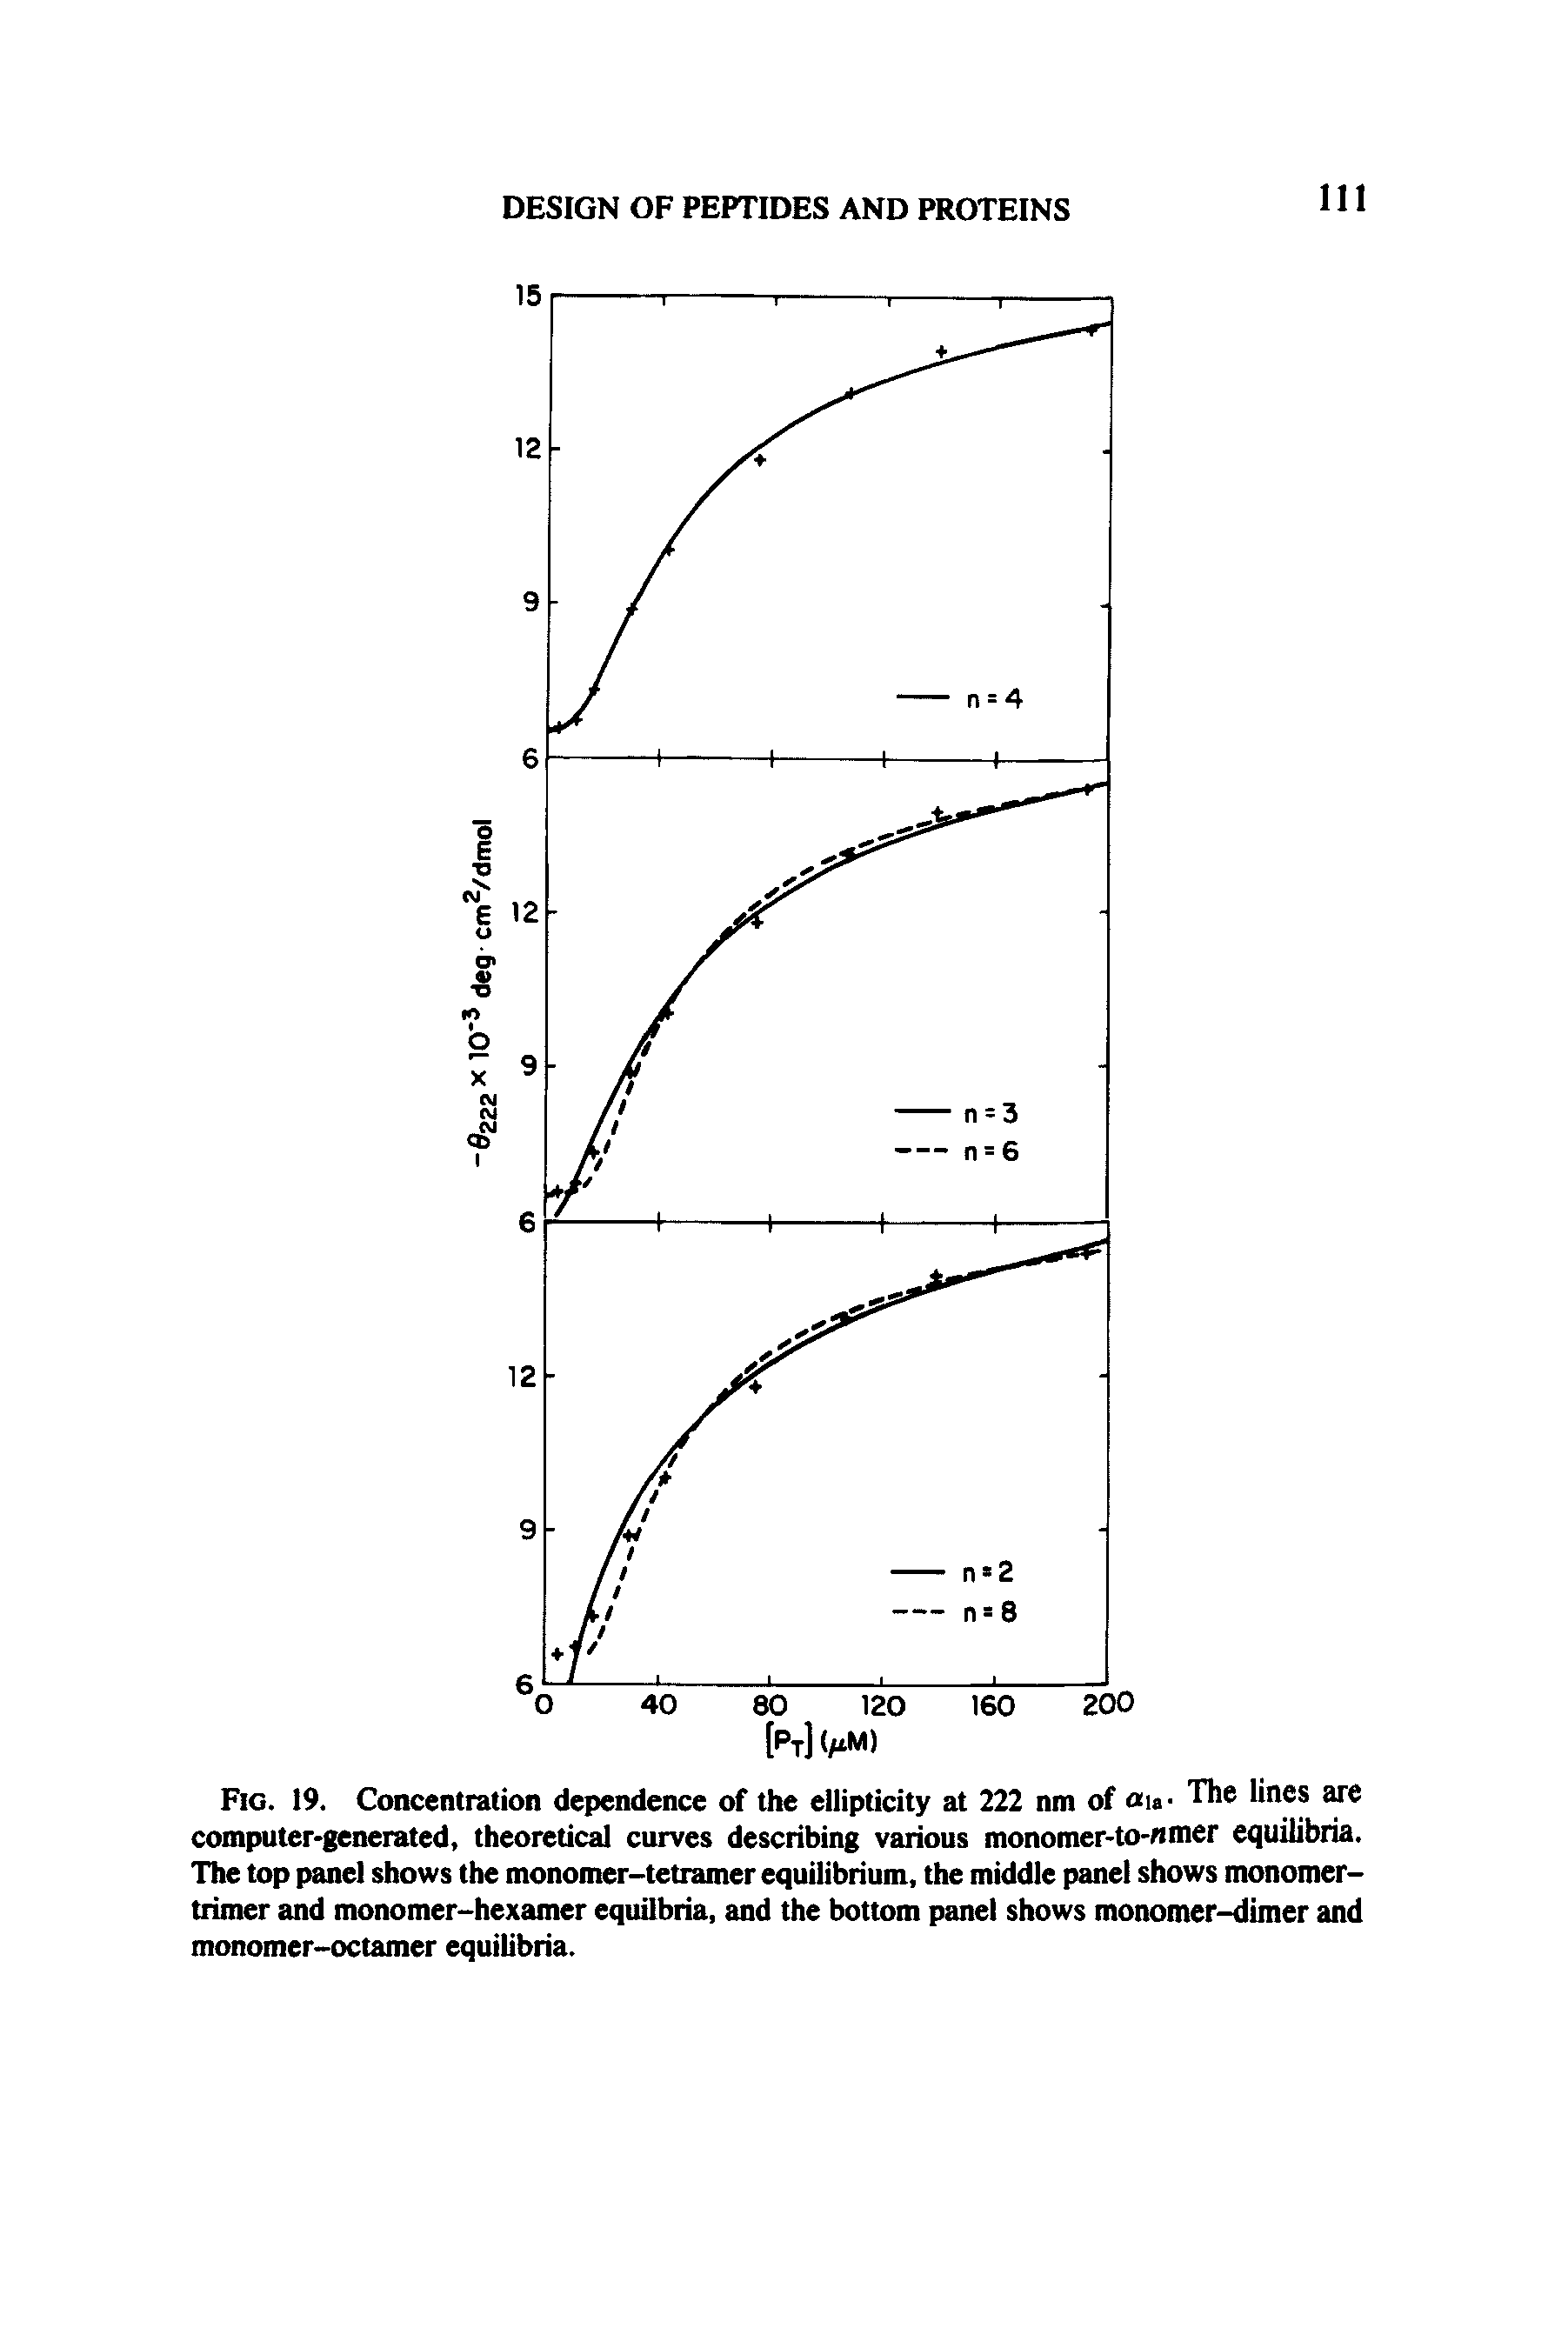 Fig. 19. Concentration dependence of the ellipticity at 222 nm of an- The lines are computer-generated, theoretical curves describing various monomer-to-nmer equilibria. The top panel shows the monomer-tetramer equilibrium, the middle panel shows monomer-trimer and monomer-hexamer equilbria, and the bottom panel shows monomer-dimer and monomer-octamer equilibria.